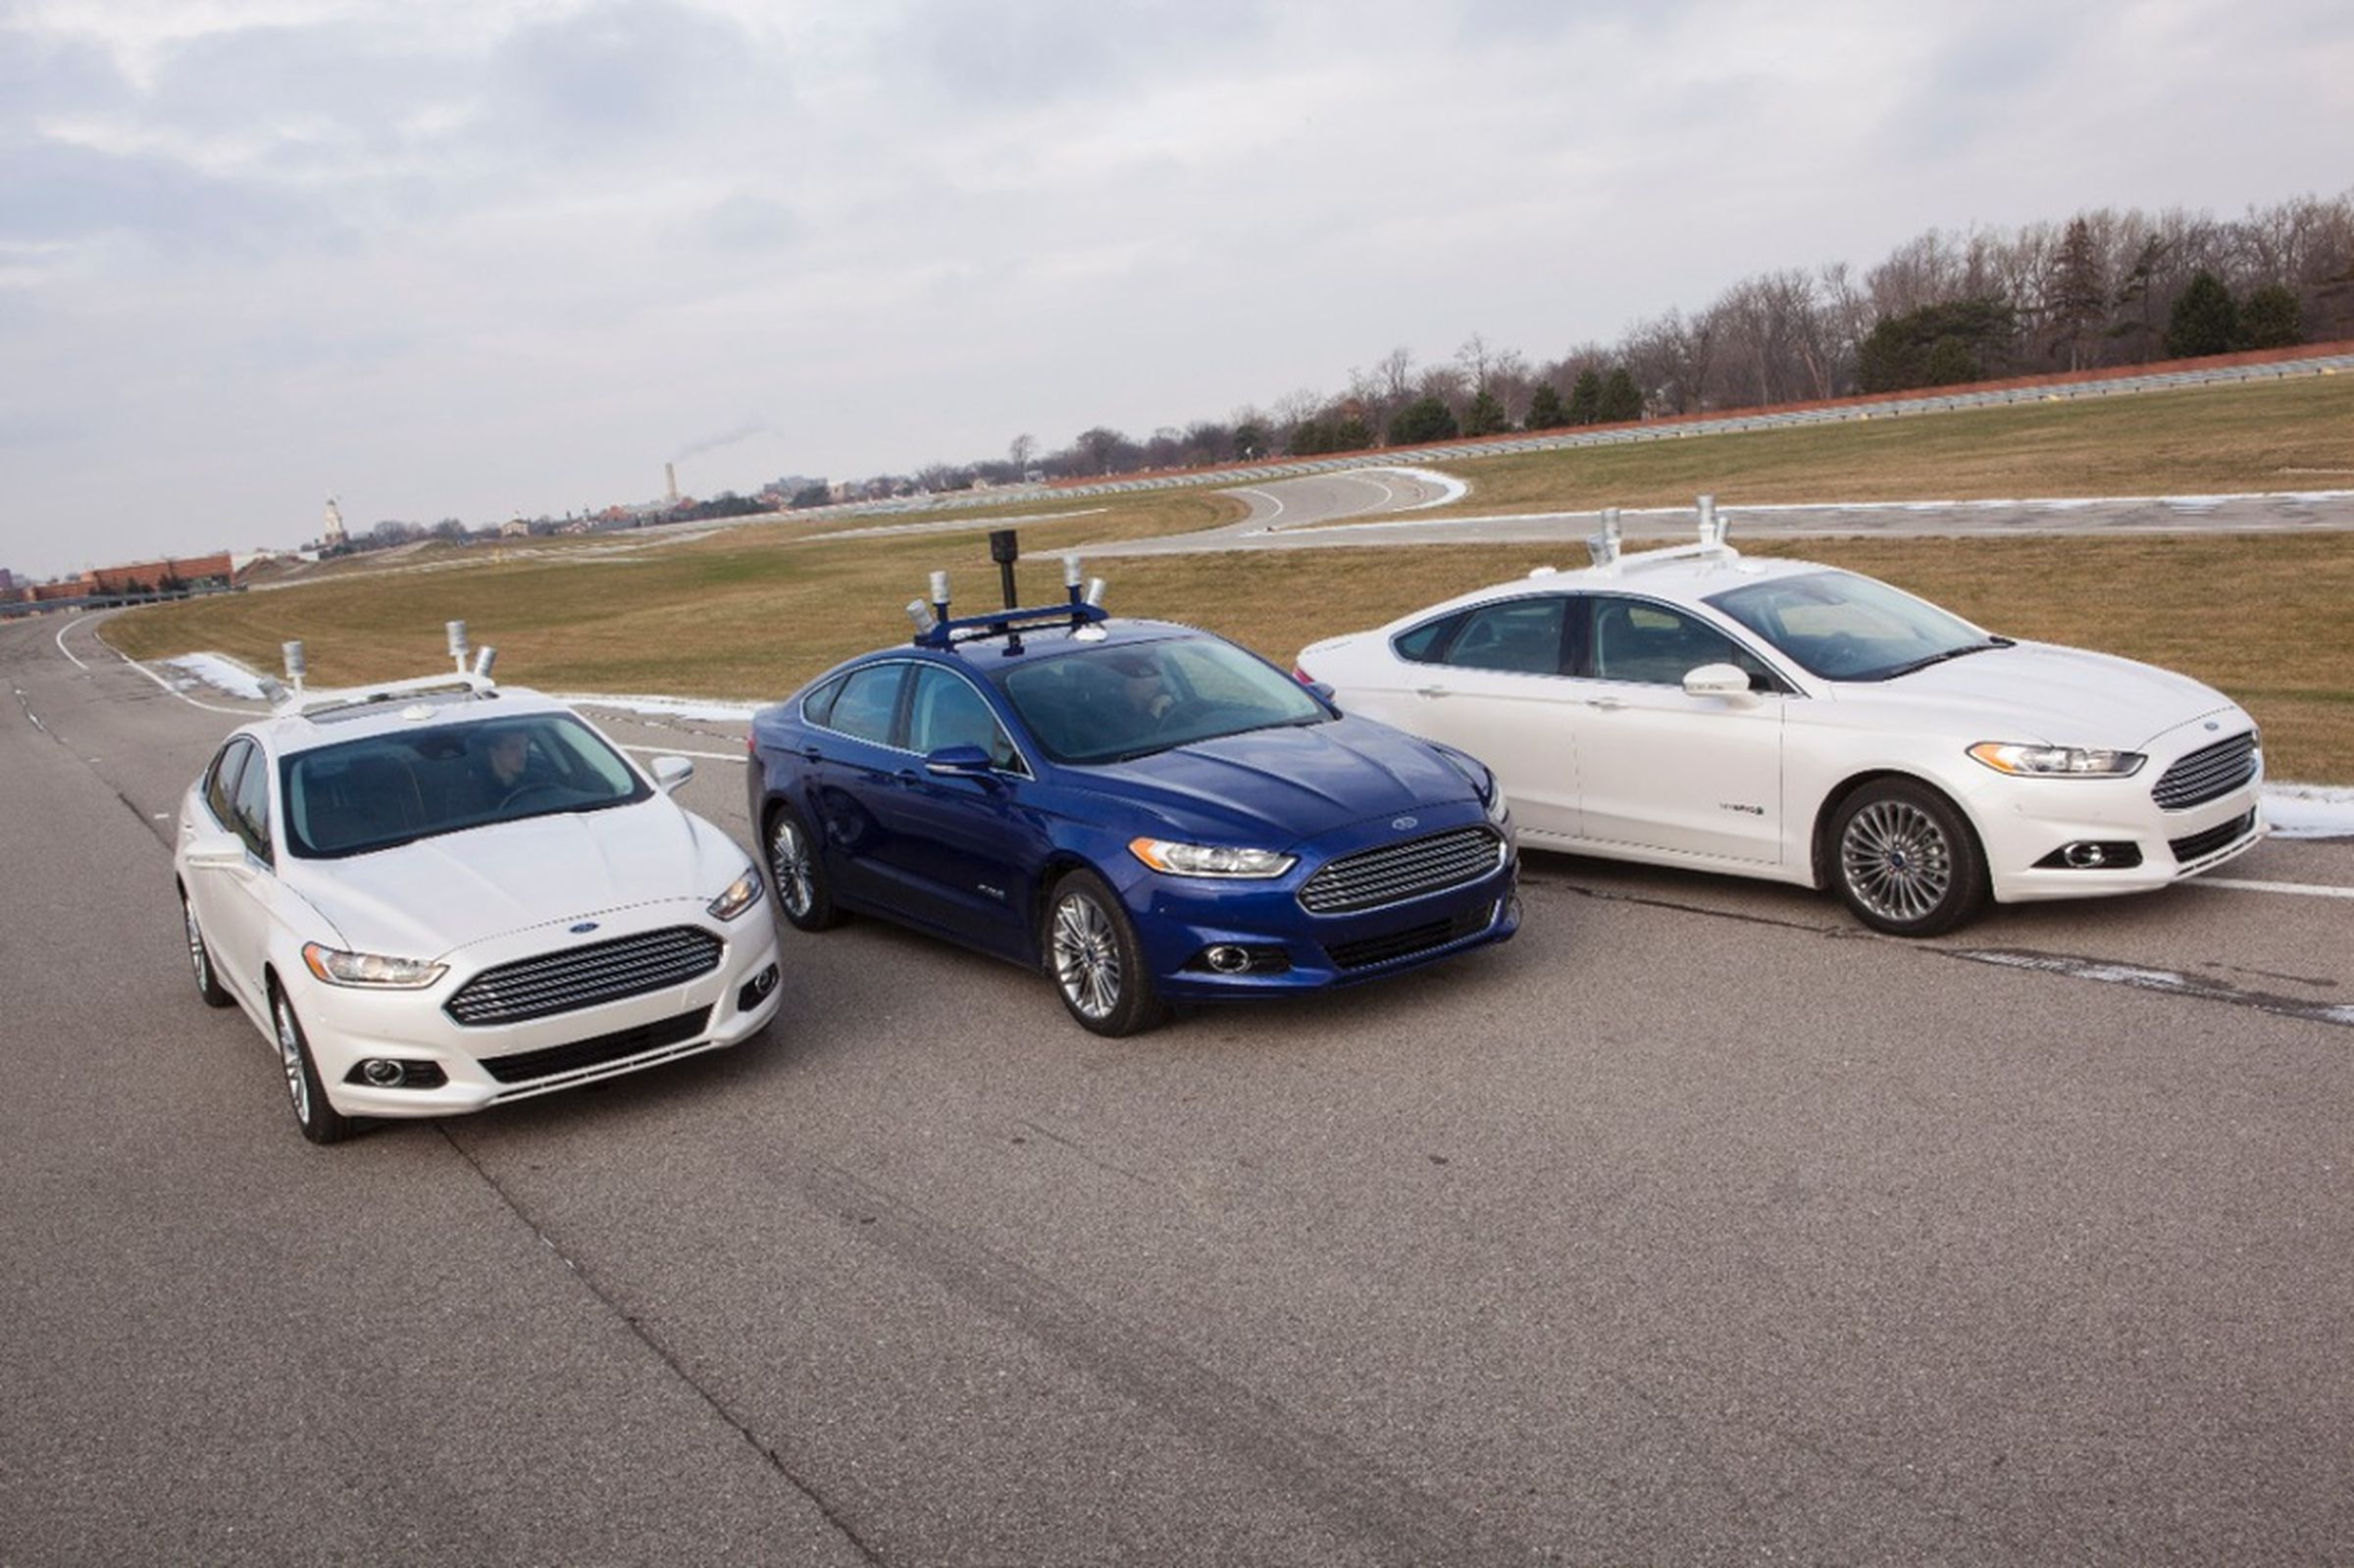 Ford Fusion Hybrid research vehicle press images